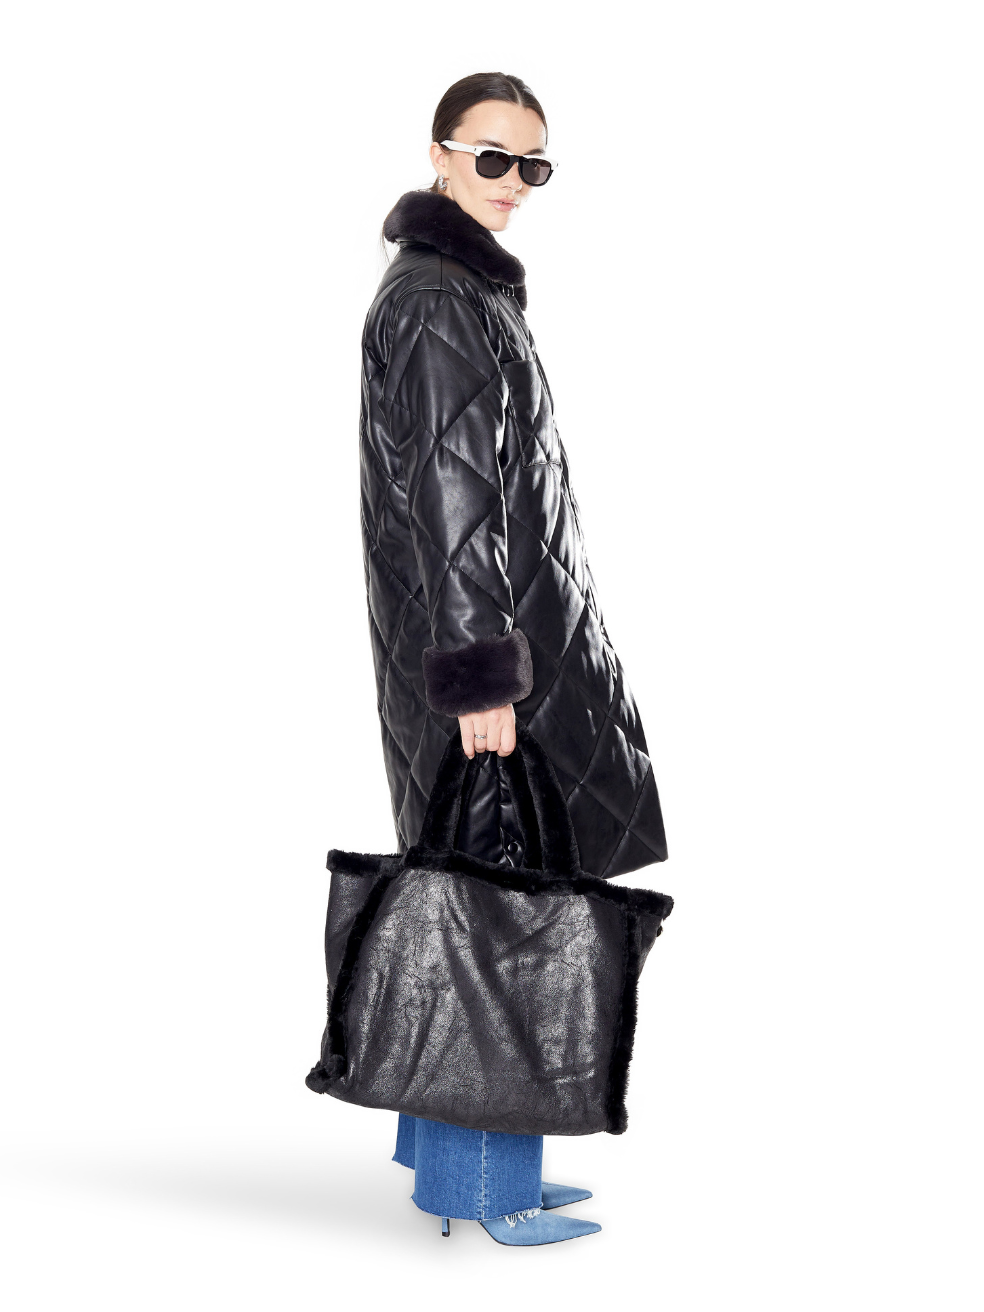 Kym Black Stormi Diamond Quilted Long Jacket Canadian Made Inclusive Fashion Animal Free Leather and Fur